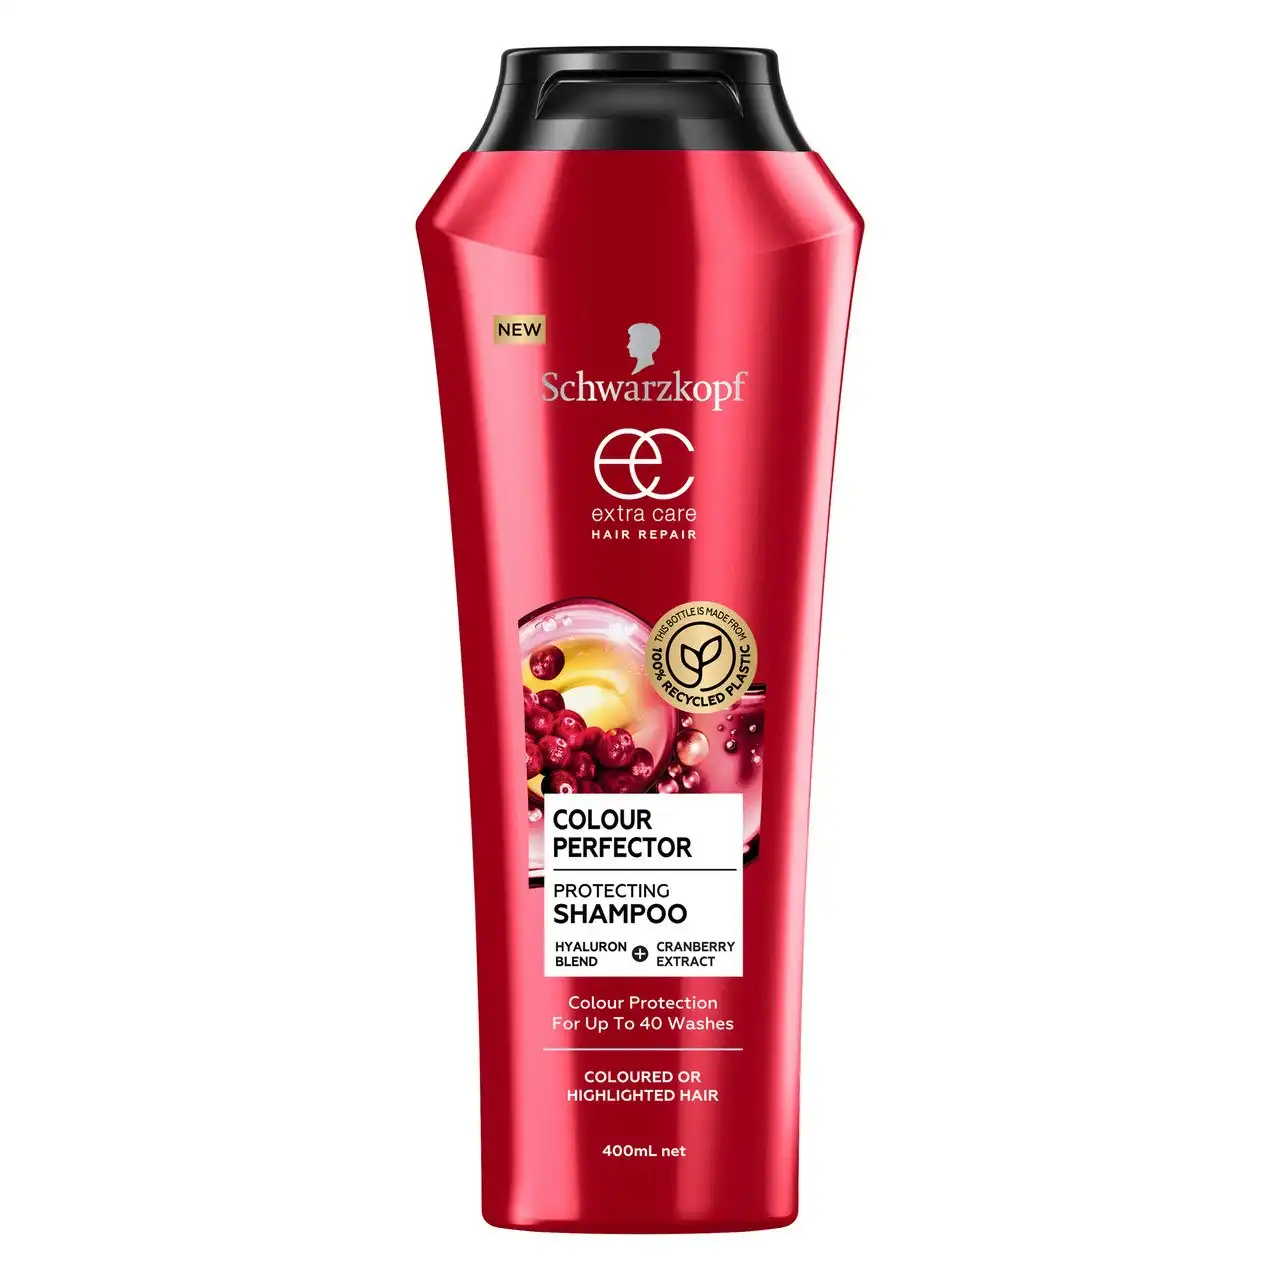 Schwarzkopf Extra Care Colour Perfector Protecting Shampoo 400mL